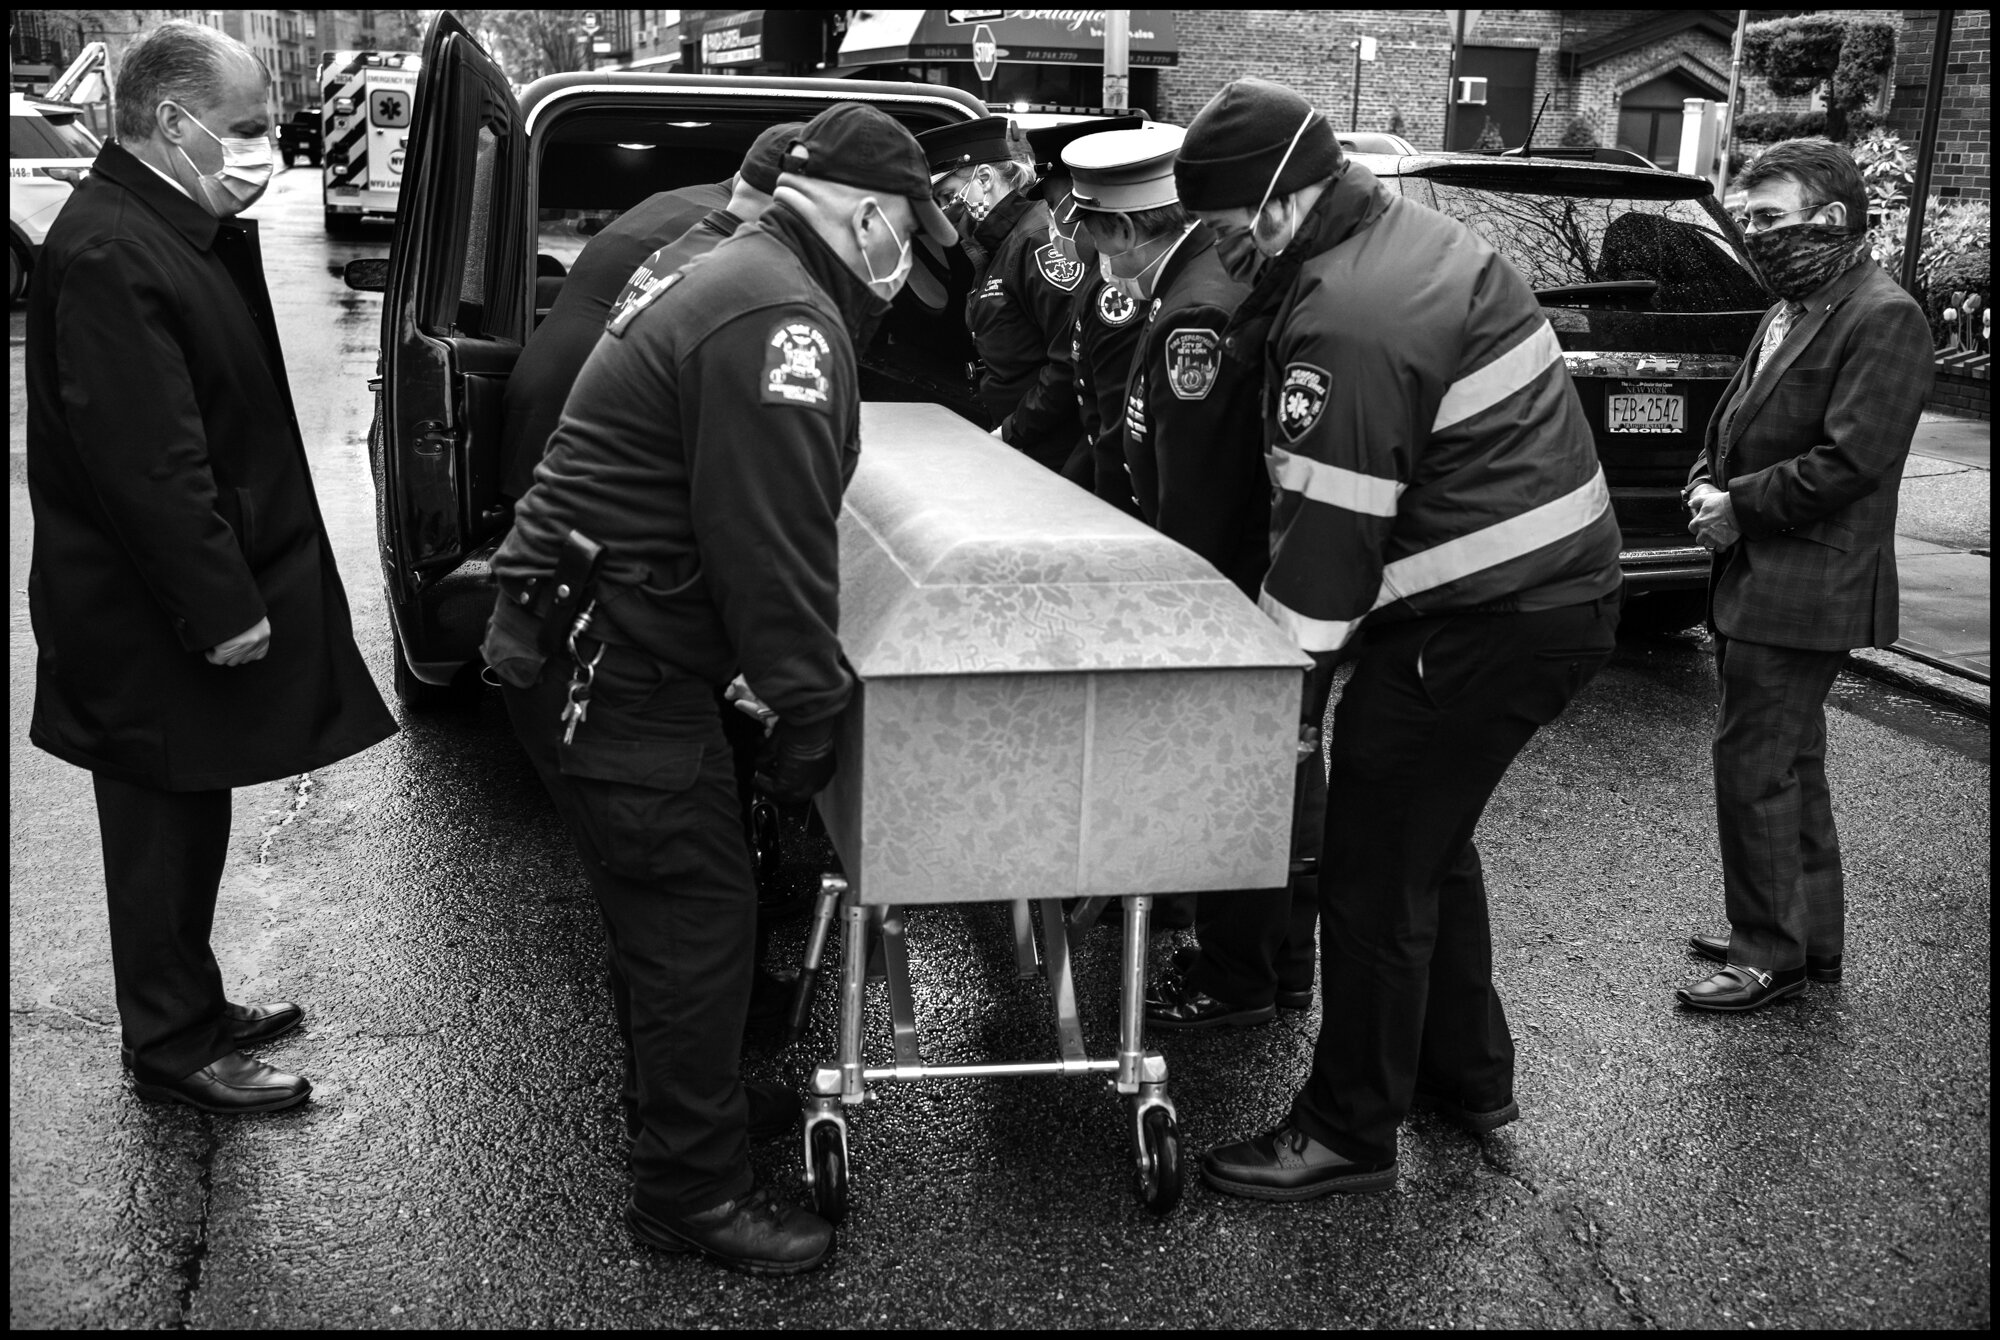  A funeral ceremony for Anthony “Tony” Thomas—a legendary Paramedic in the New York City area, who died of Covid-19 related causes. Bay Ridge, Brooklyn, New York.  April 30, 2020. © Peter Turnley.  ID# 55-001 